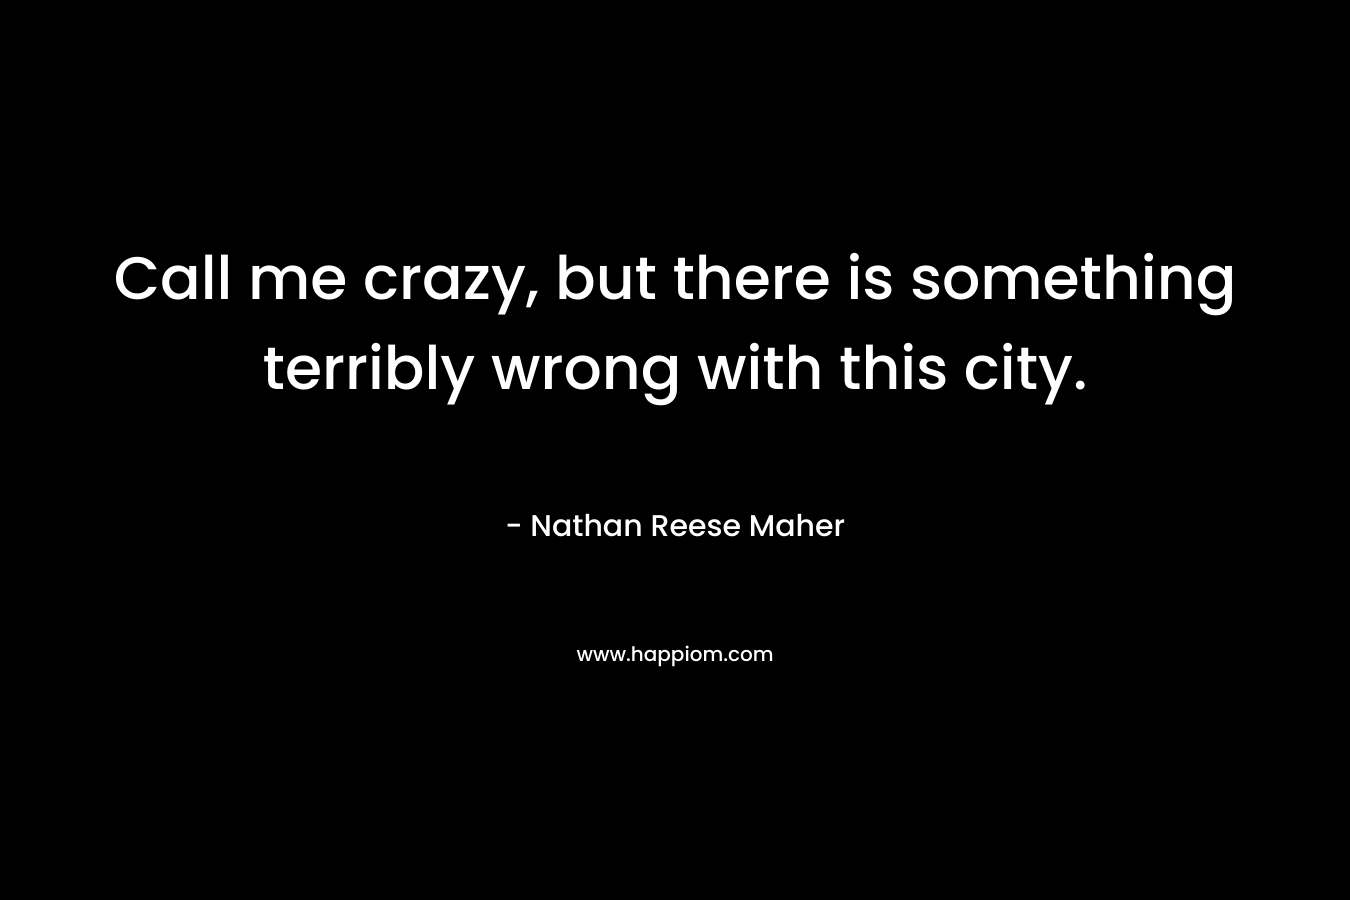 Call me crazy, but there is something terribly wrong with this city. – Nathan Reese Maher